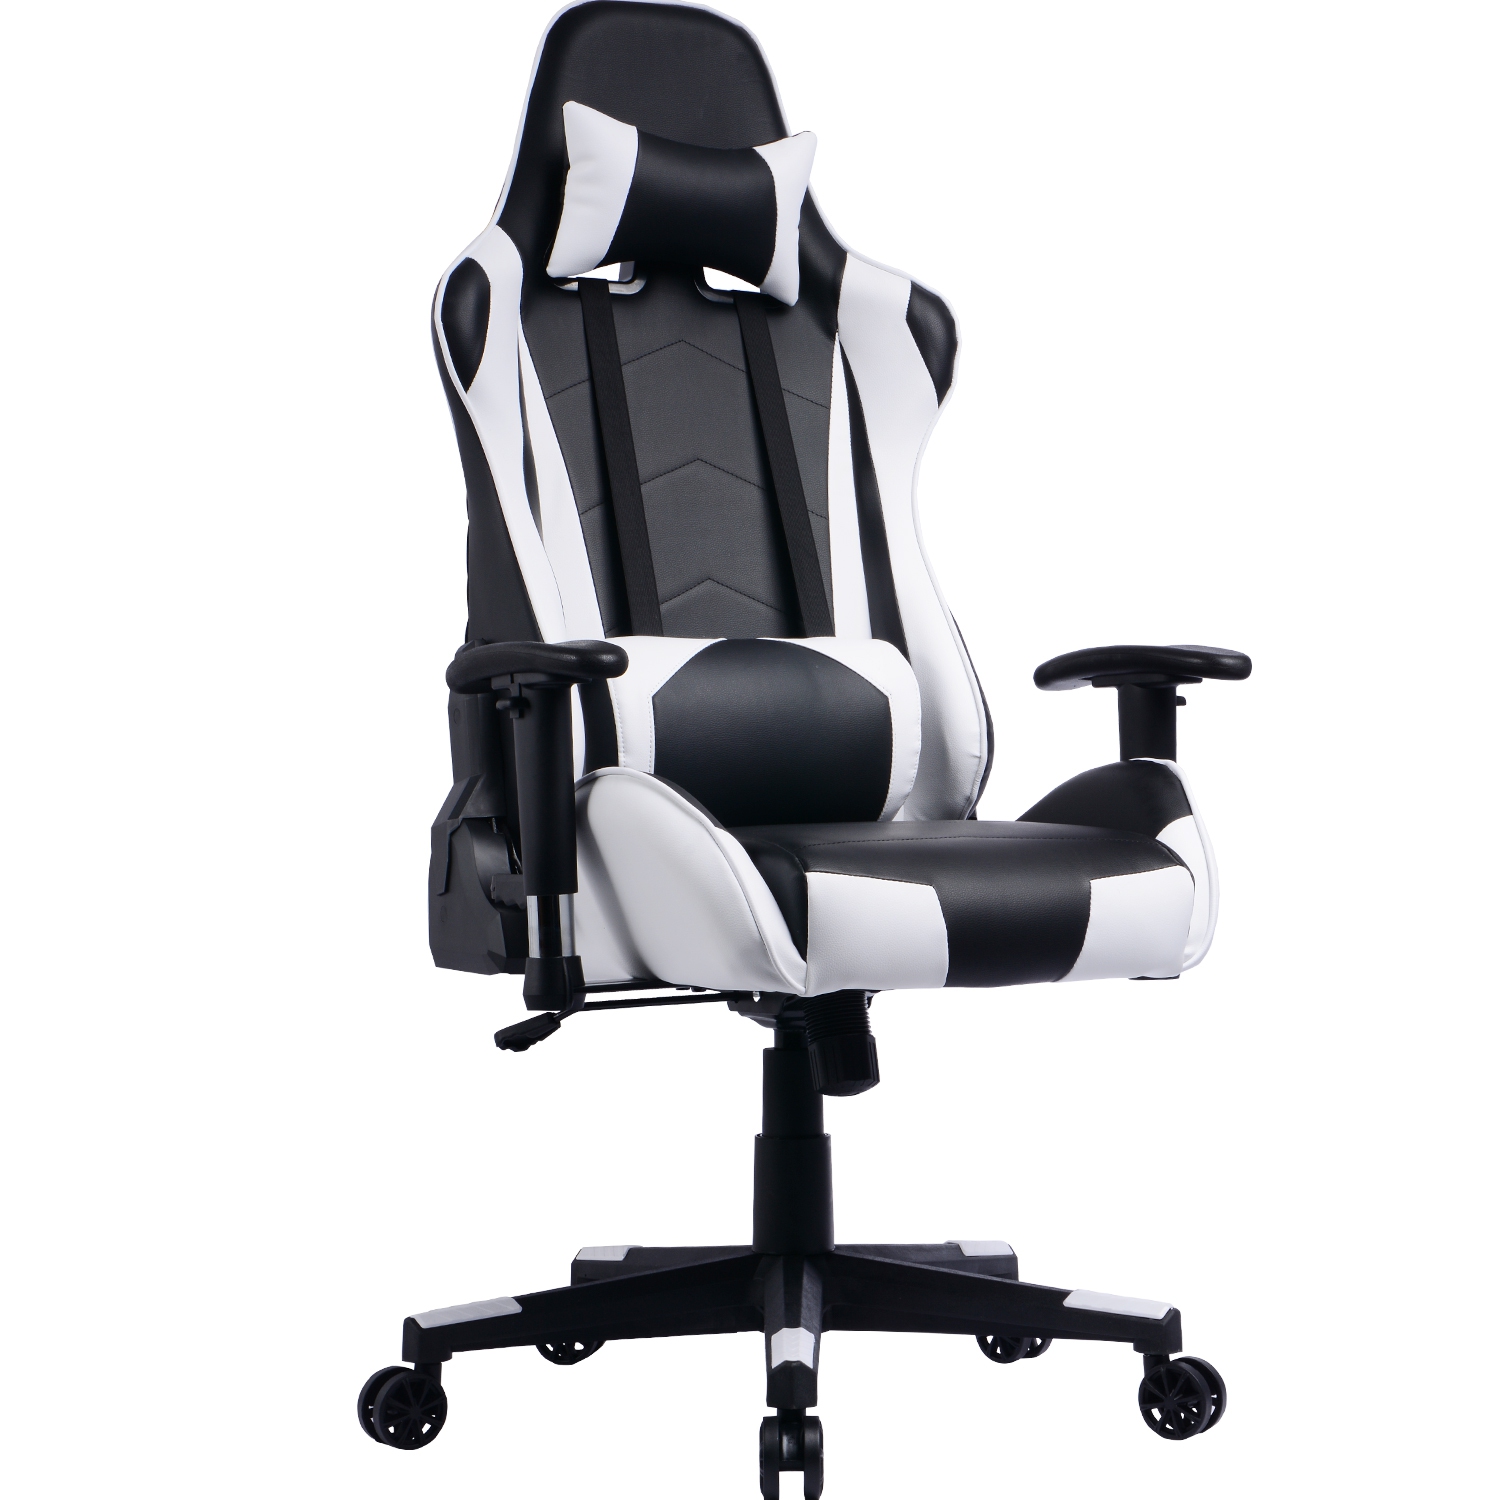 GamingChair Ergonomic PU Leather Racing Gaming Chair with Reclining Backrest & Adjustable Armrests (White)